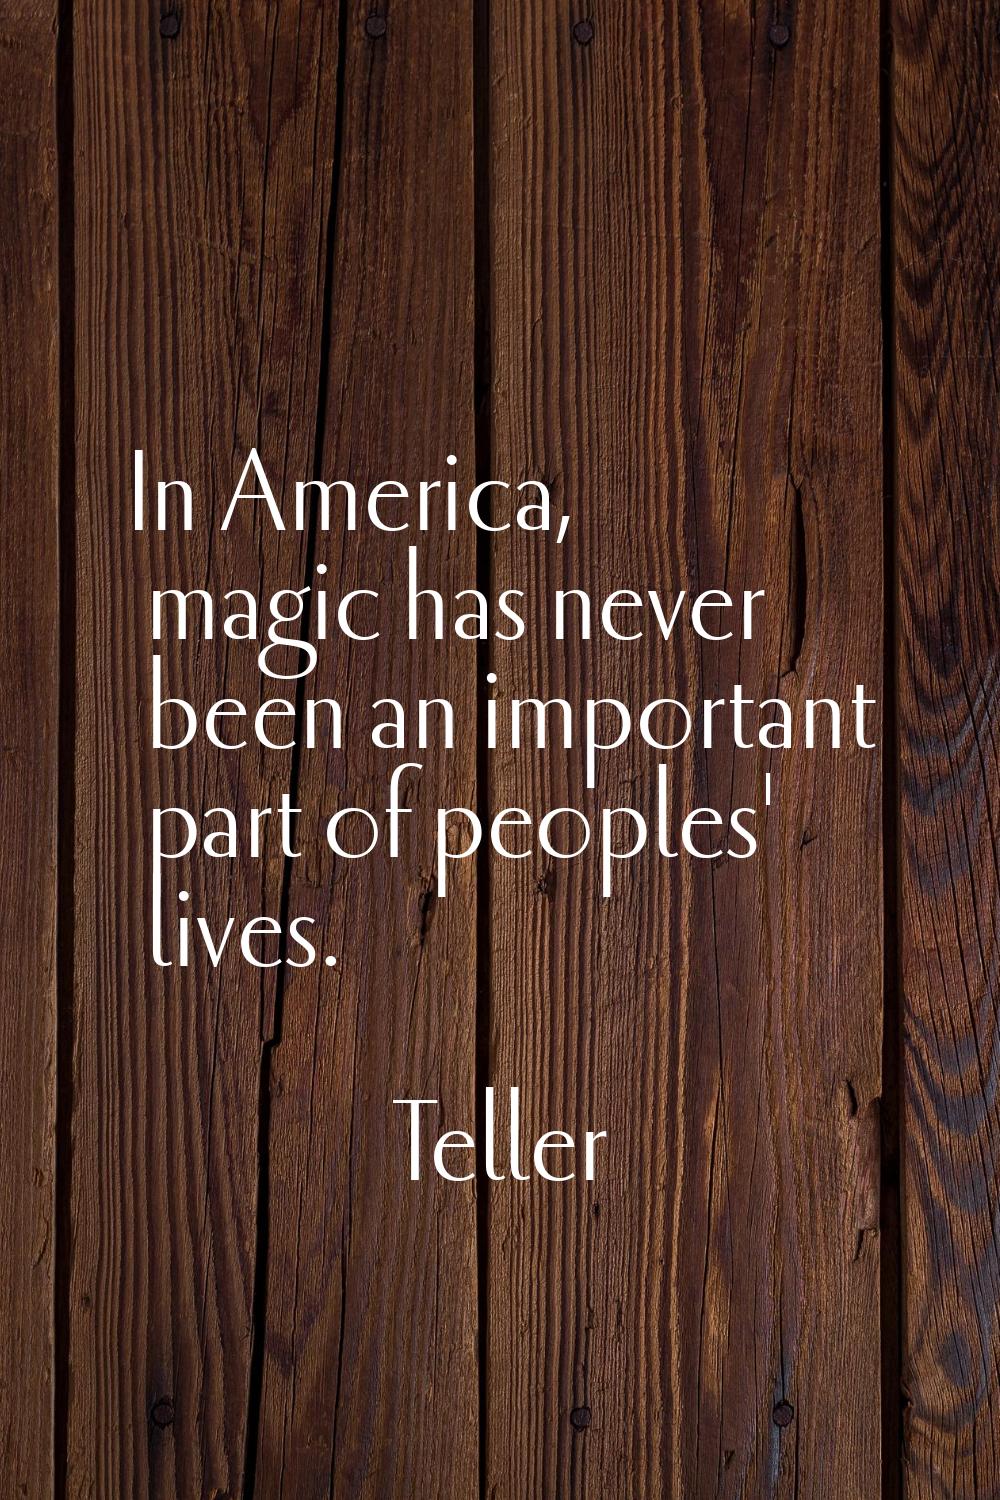 In America, magic has never been an important part of peoples' lives.